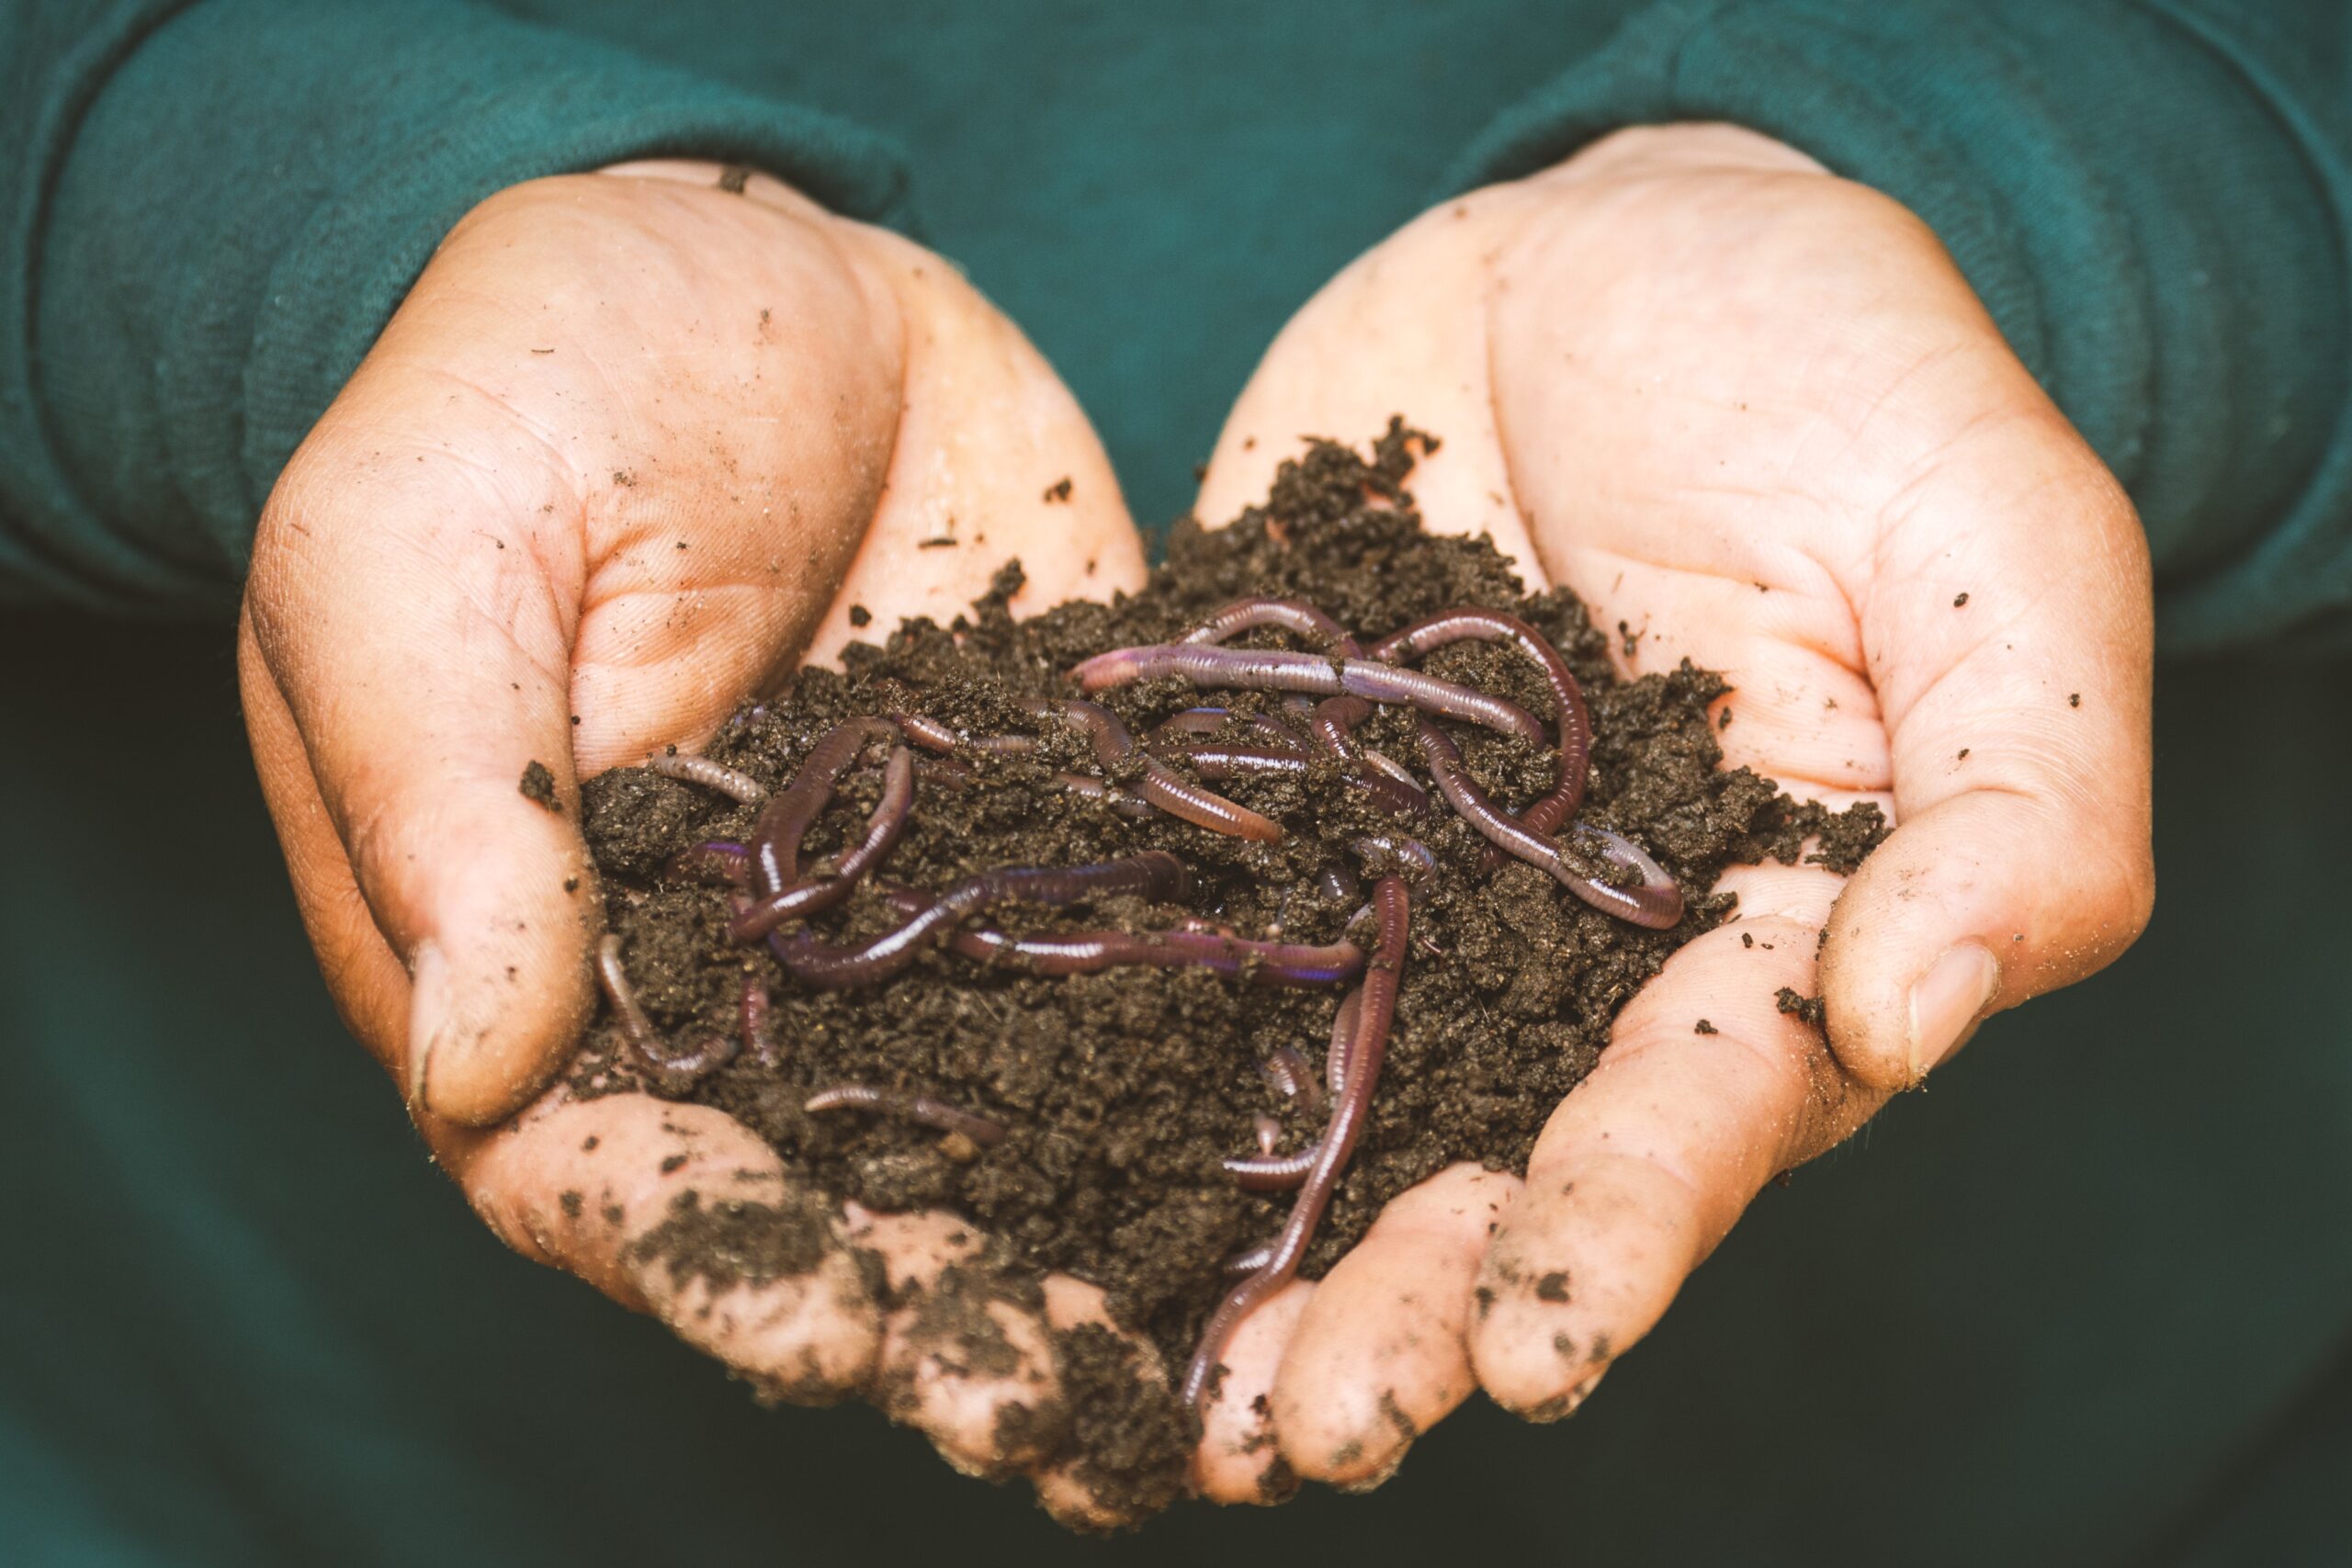 Make your own DIY worm farm and create worm castings indoors year round!